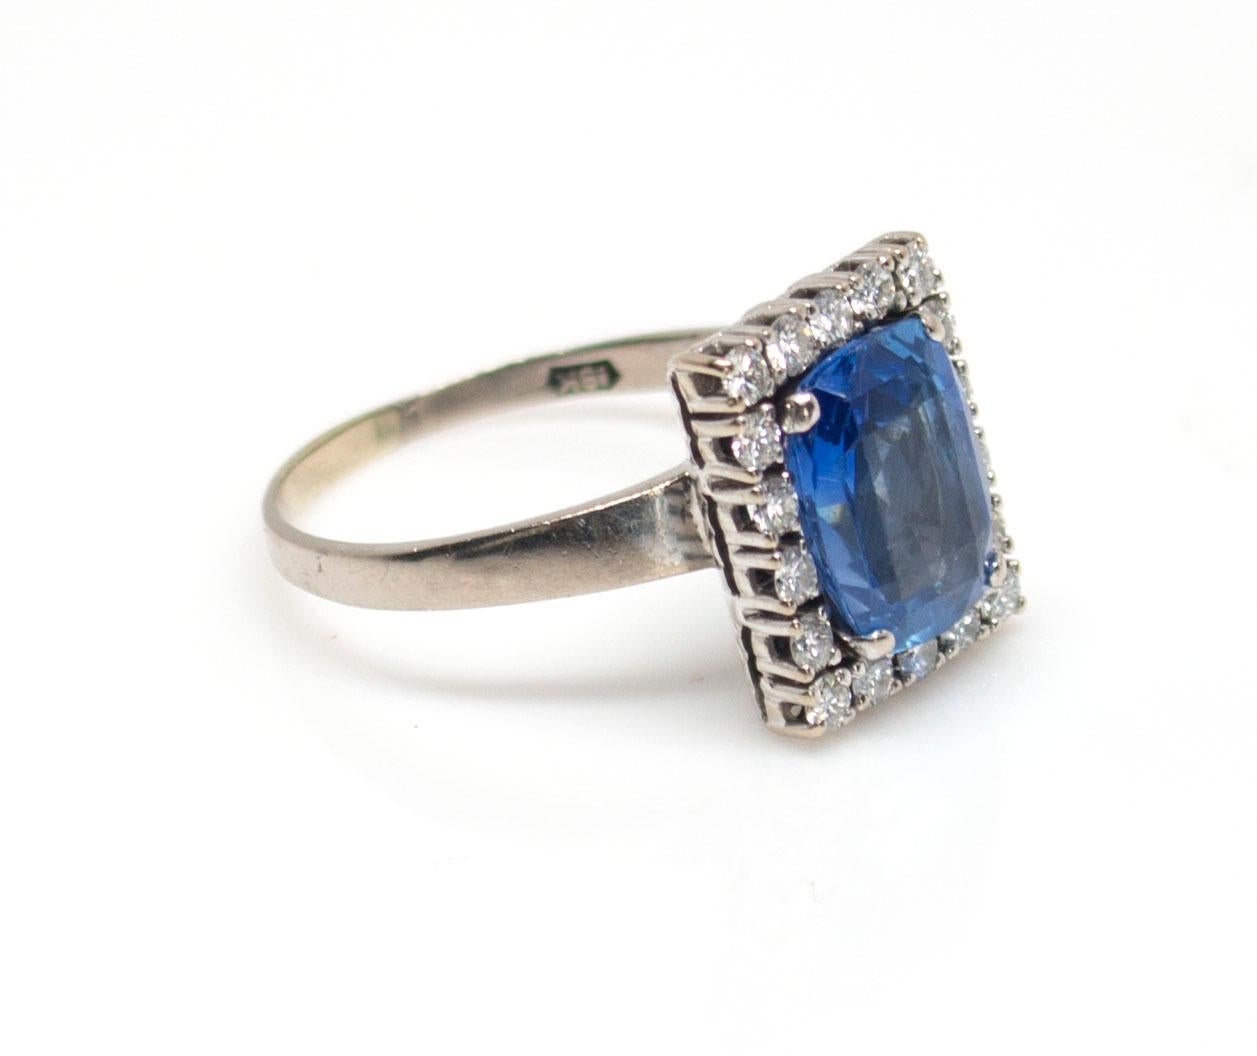 Art Deco 18k white gold ring with a 4.35ct rectangular cushion cut natural Sapphire with 18 diamond approx. 0.75ct. Comes with EGL Certificate and UGS Appraisal for 100% Natural (No Treatment) Rectangular Cushion Mixed Blue Sapphire. Size 10.5,